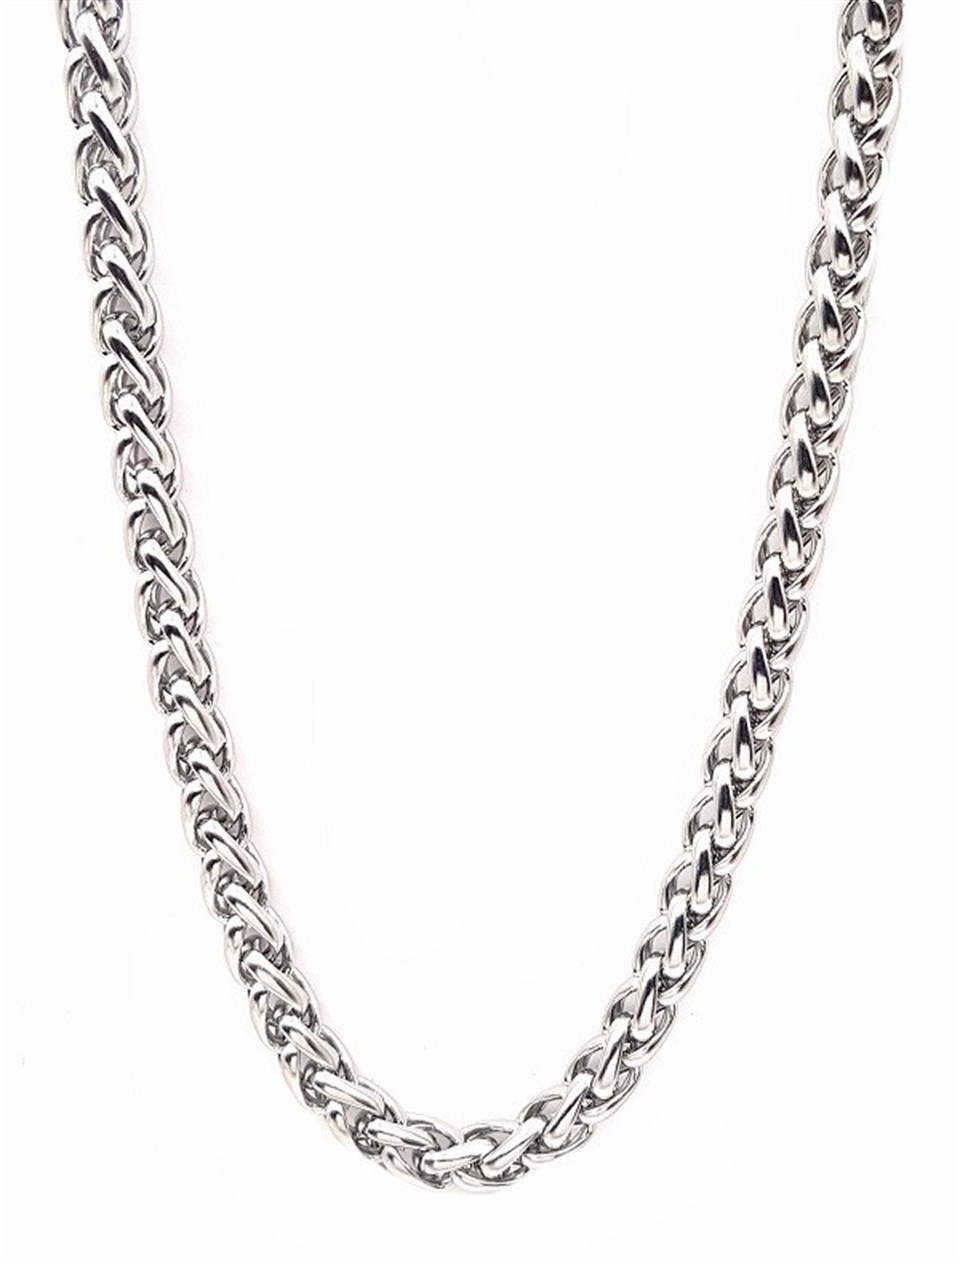 Welch Steel Mens Chain Necklace